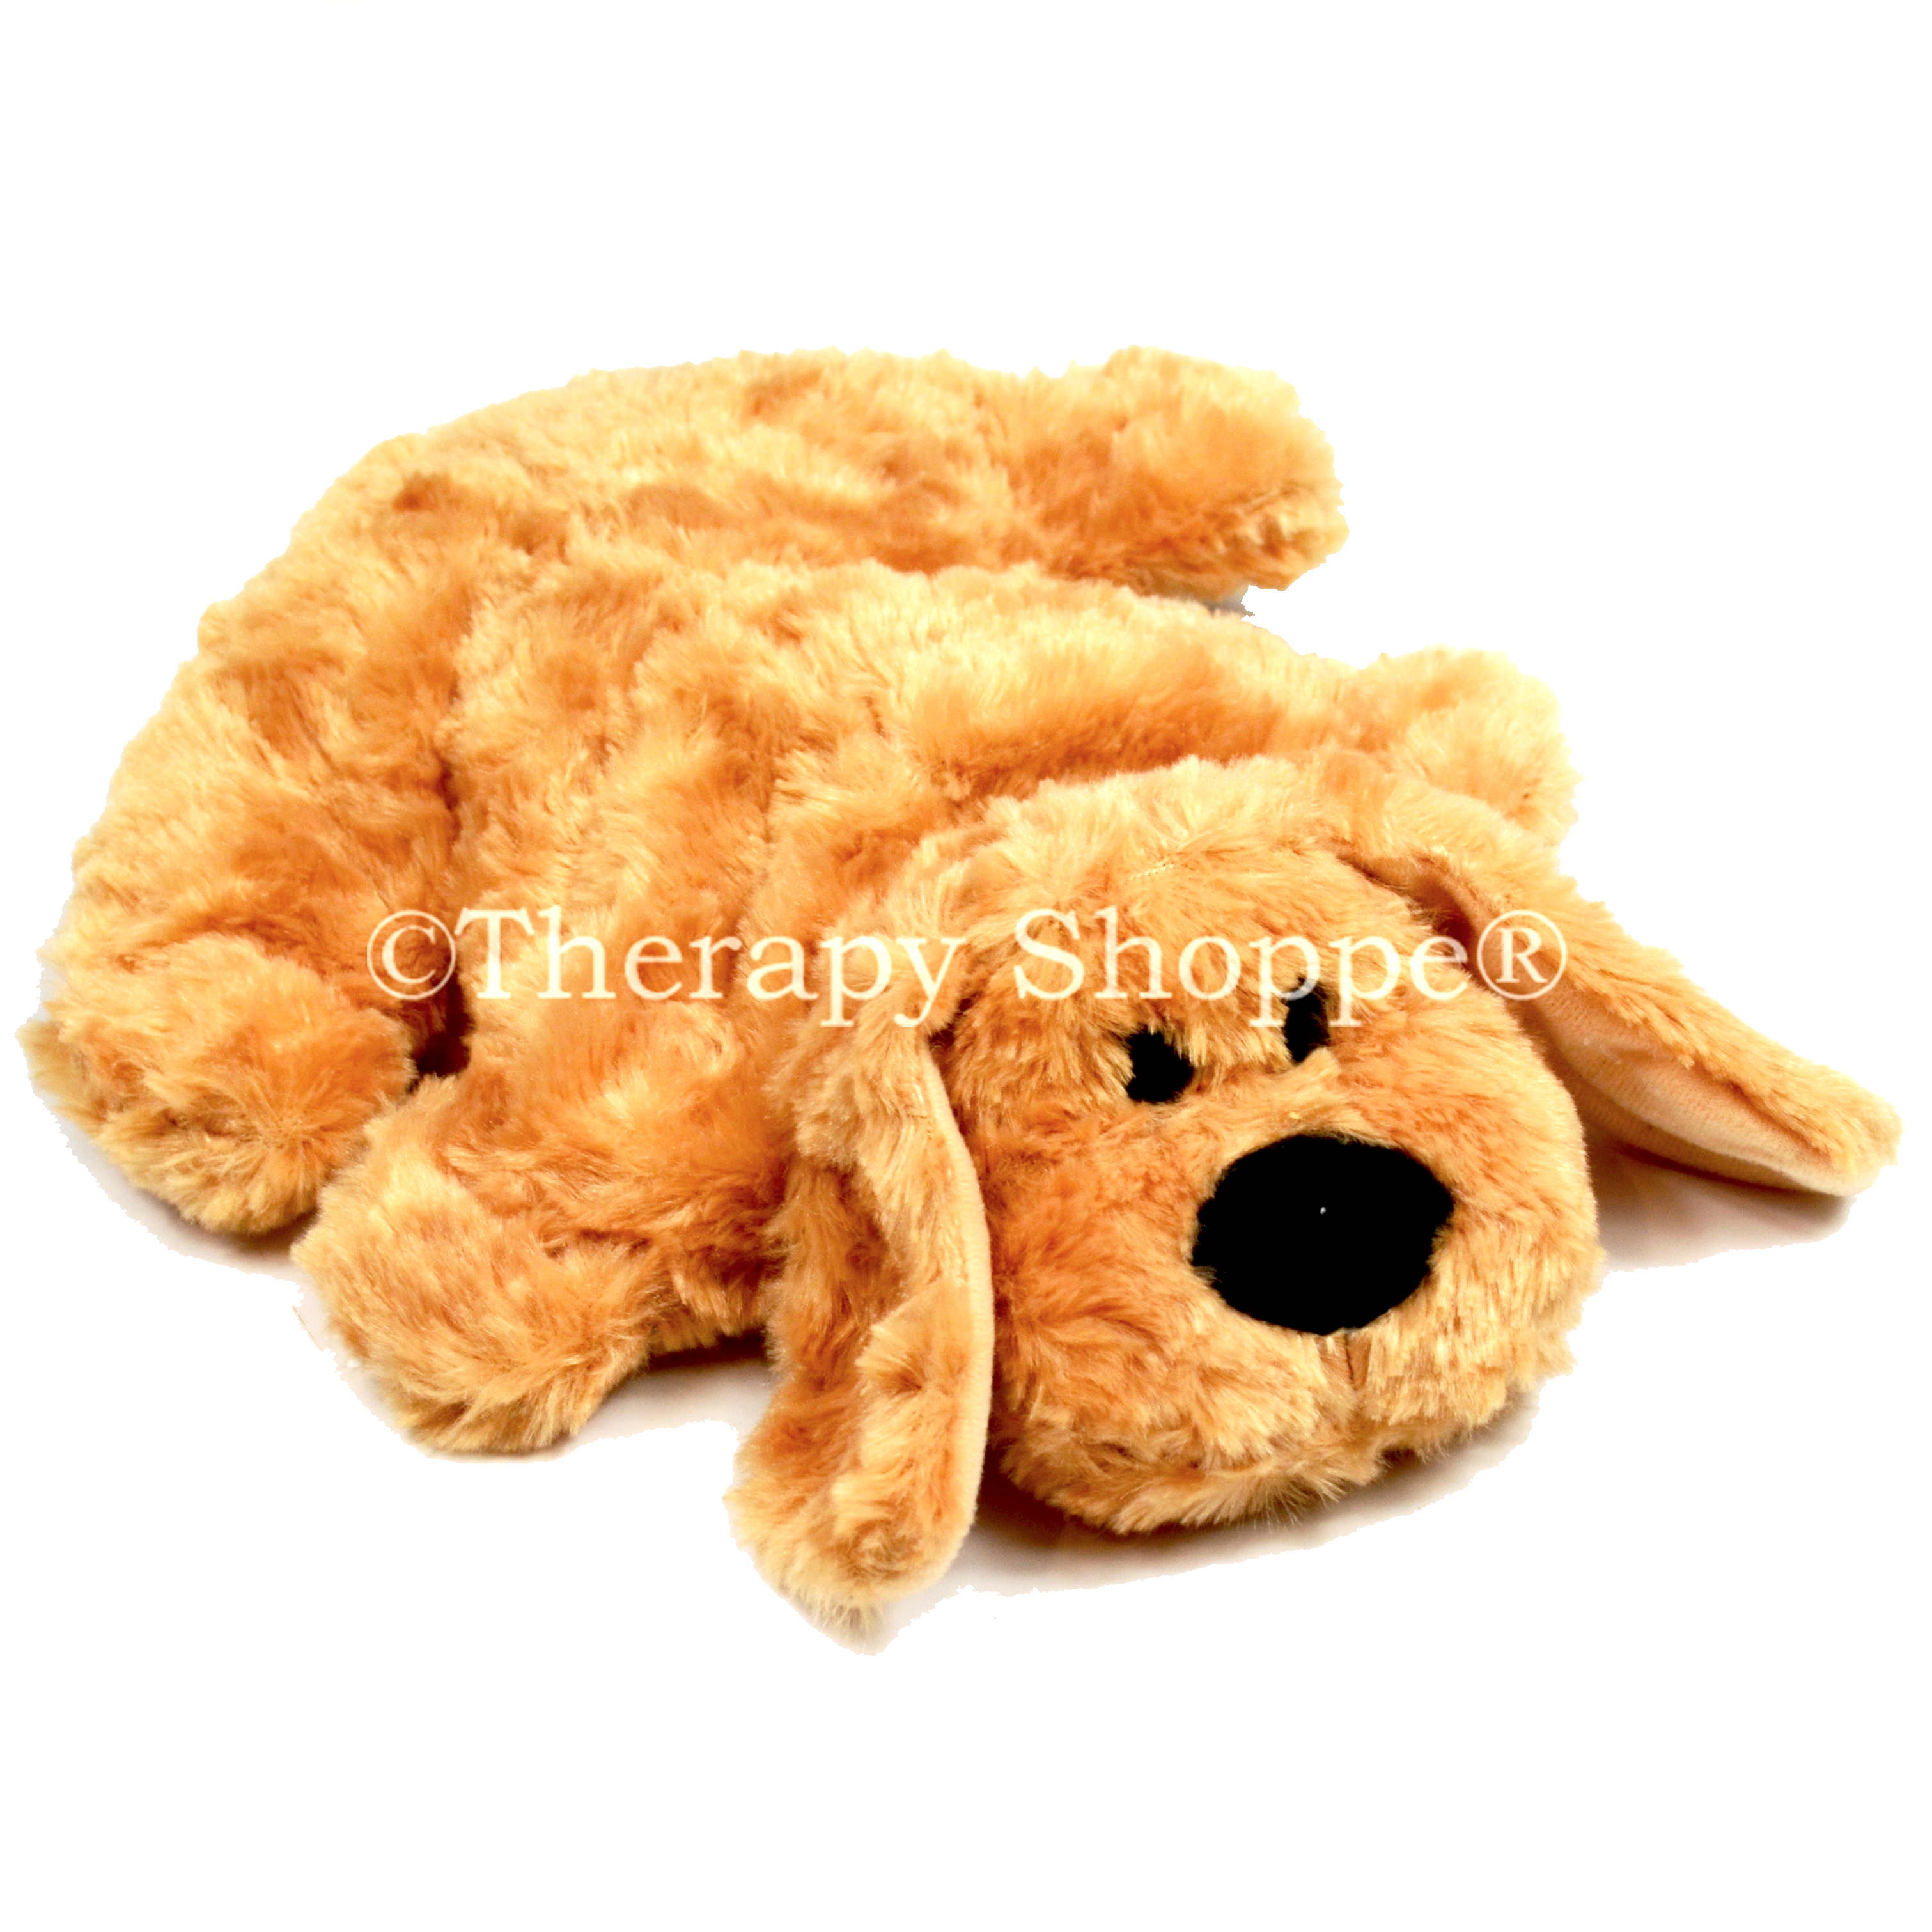 4.5 lb. Shaggy Weighted Puppy, Discontinued Products, 4.5 lb. Shaggy  Weighted Puppy from Therapy Shoppe Shaggy Weighted Puppy, Stuffed Weighted  Animals